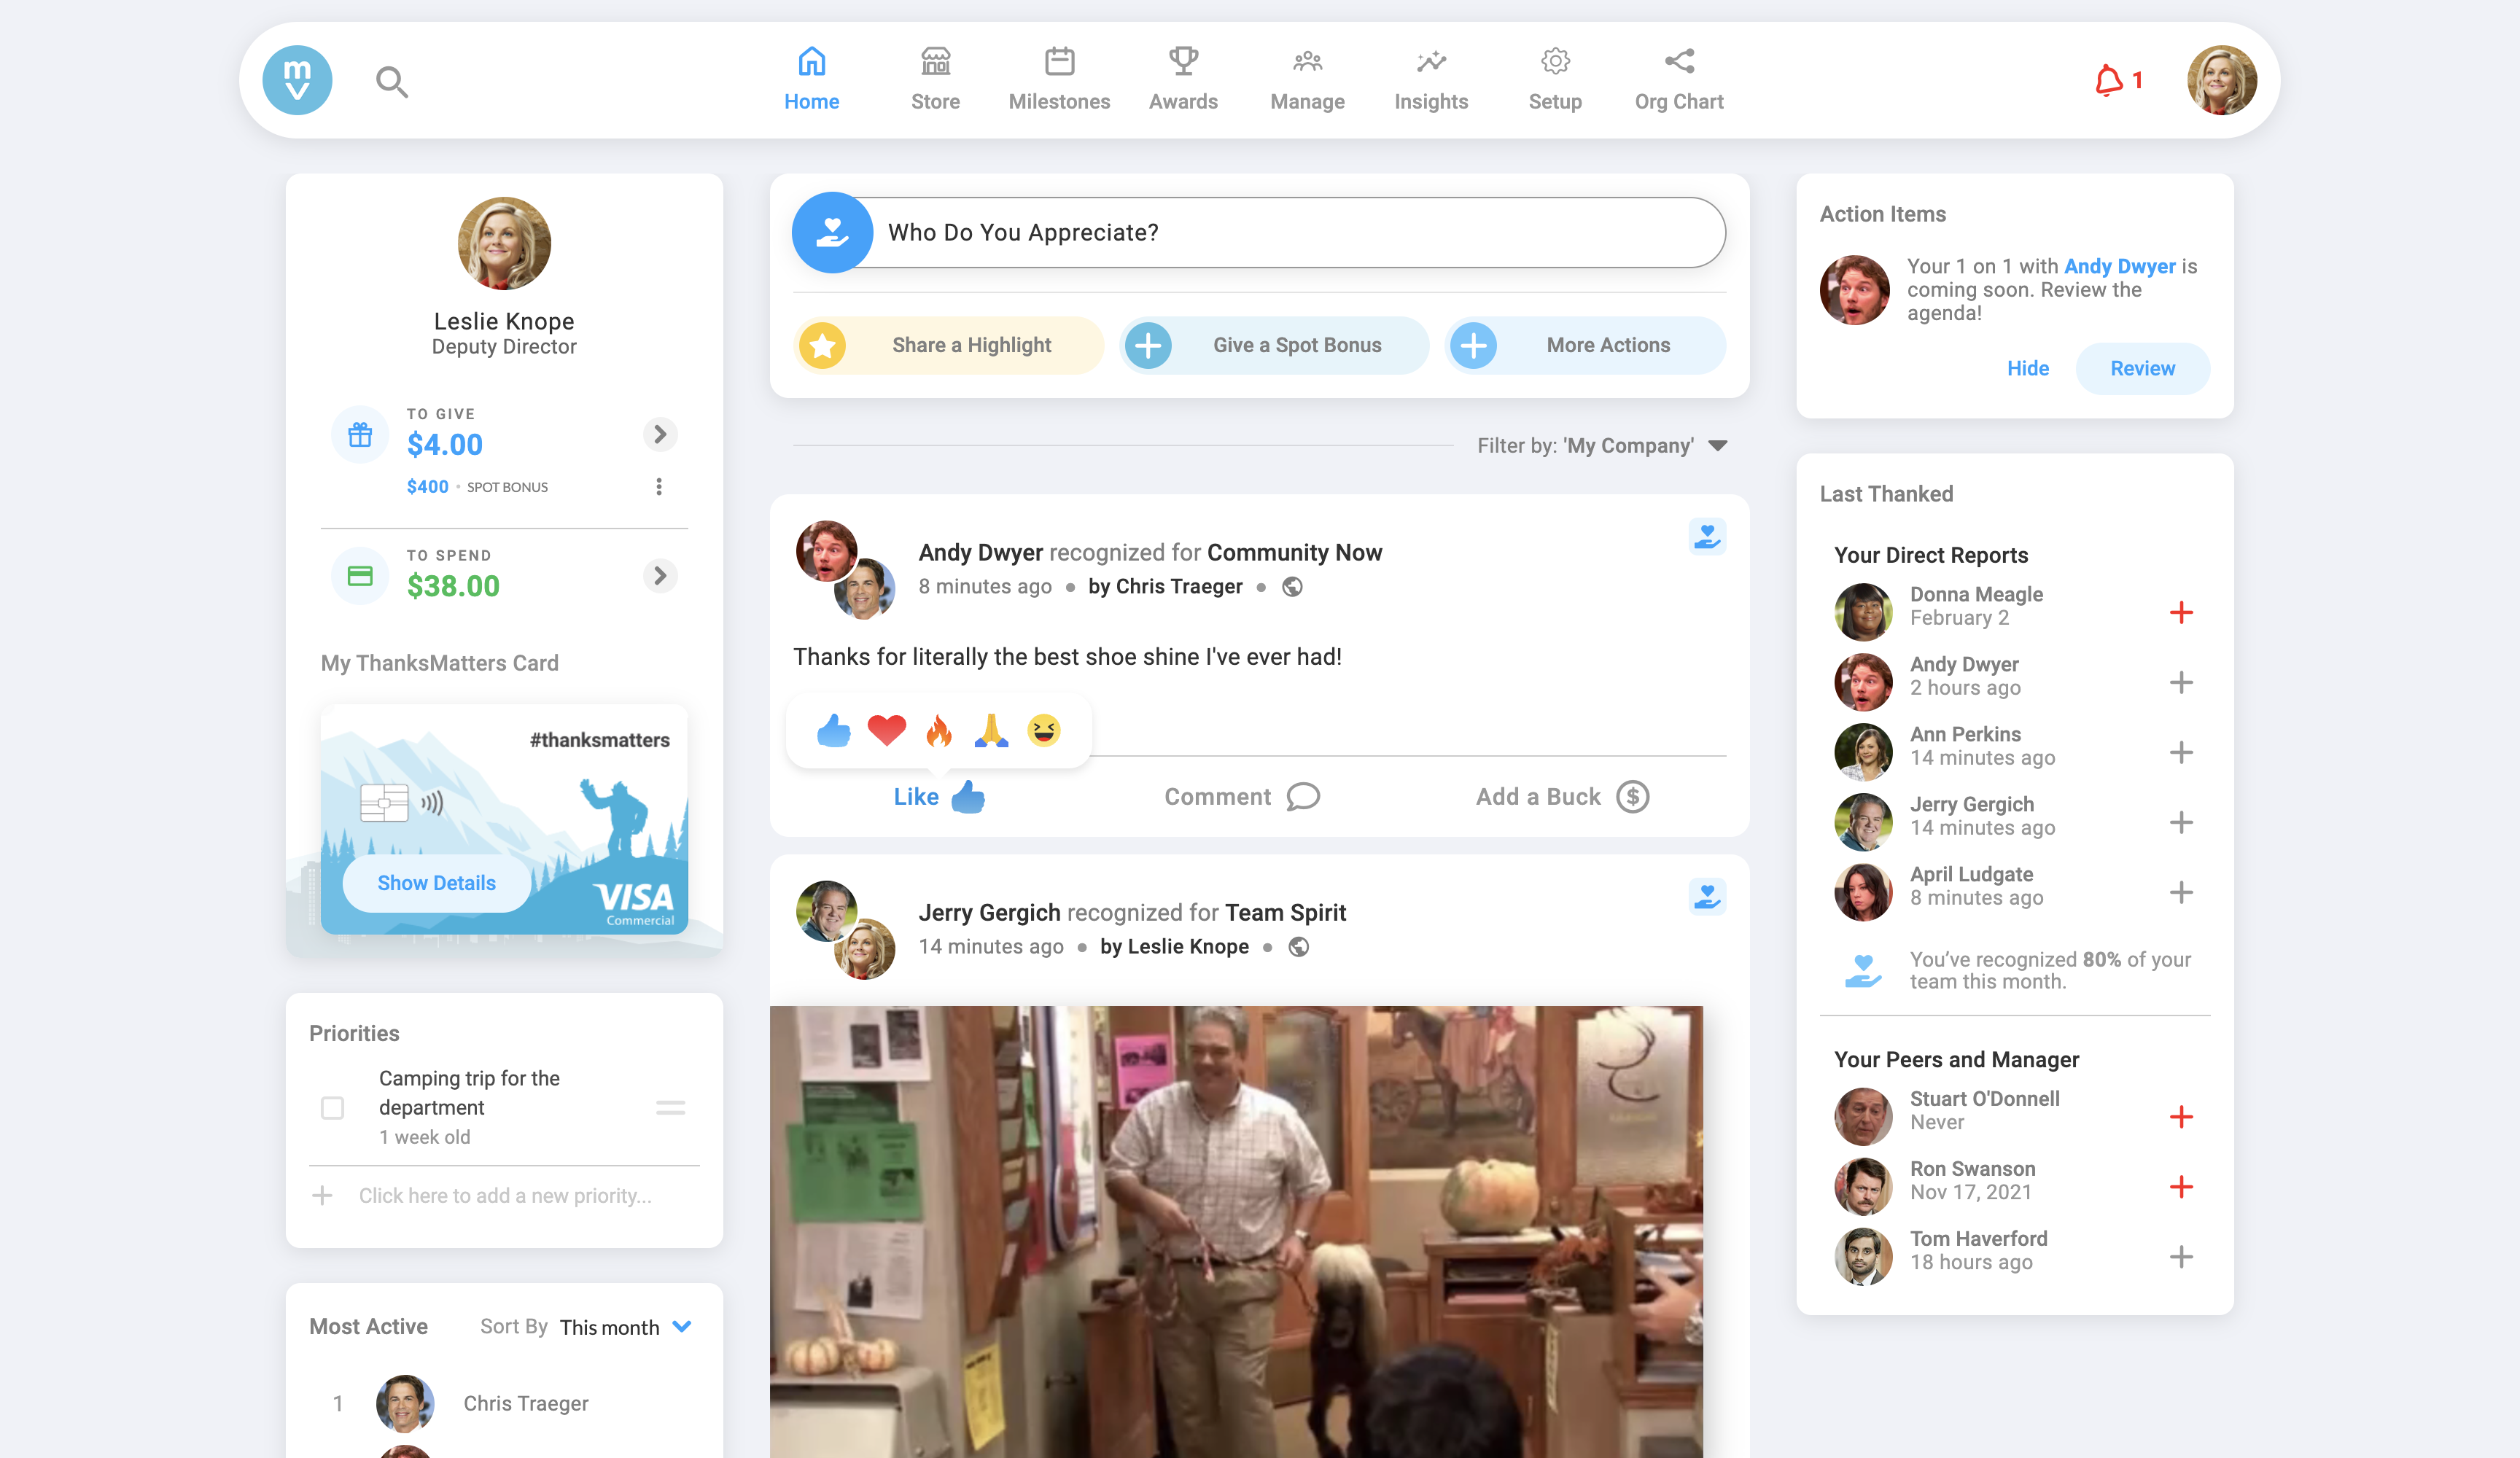 The public social feed of all the great things happening in your workplace. Peers can like, comment and connect with each other.